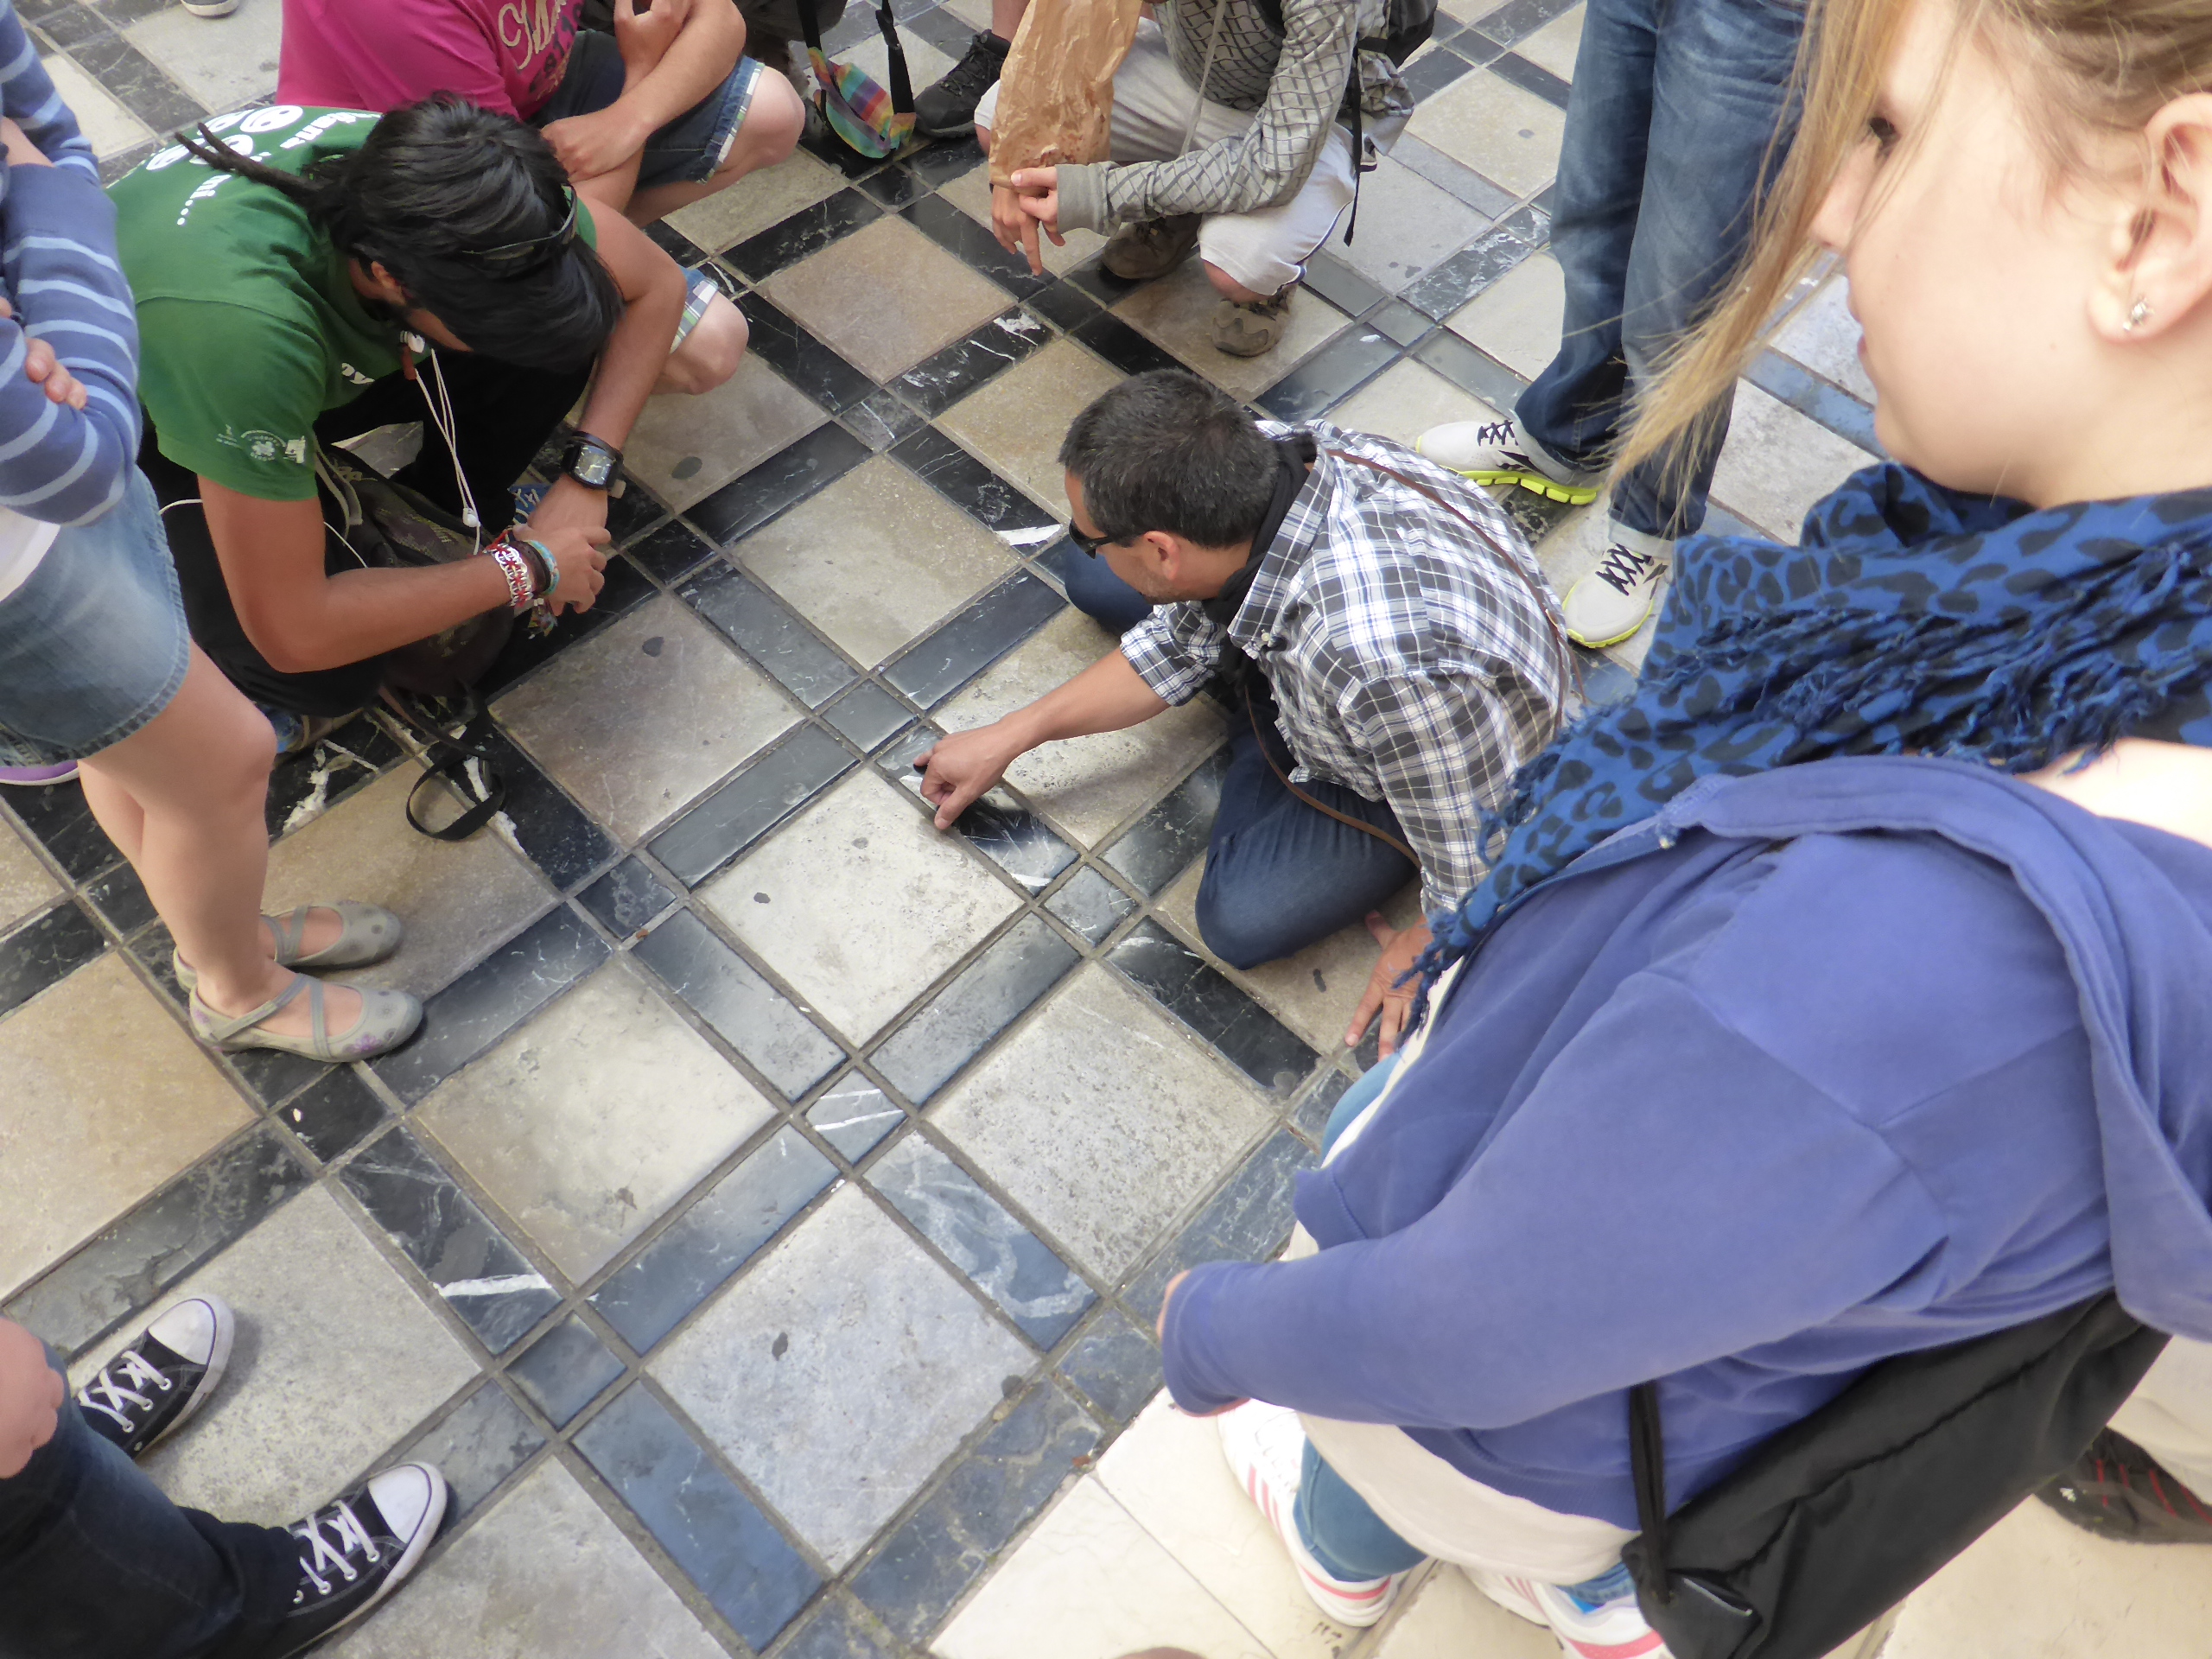 Participants huddled around examining fossils in the city's pavements